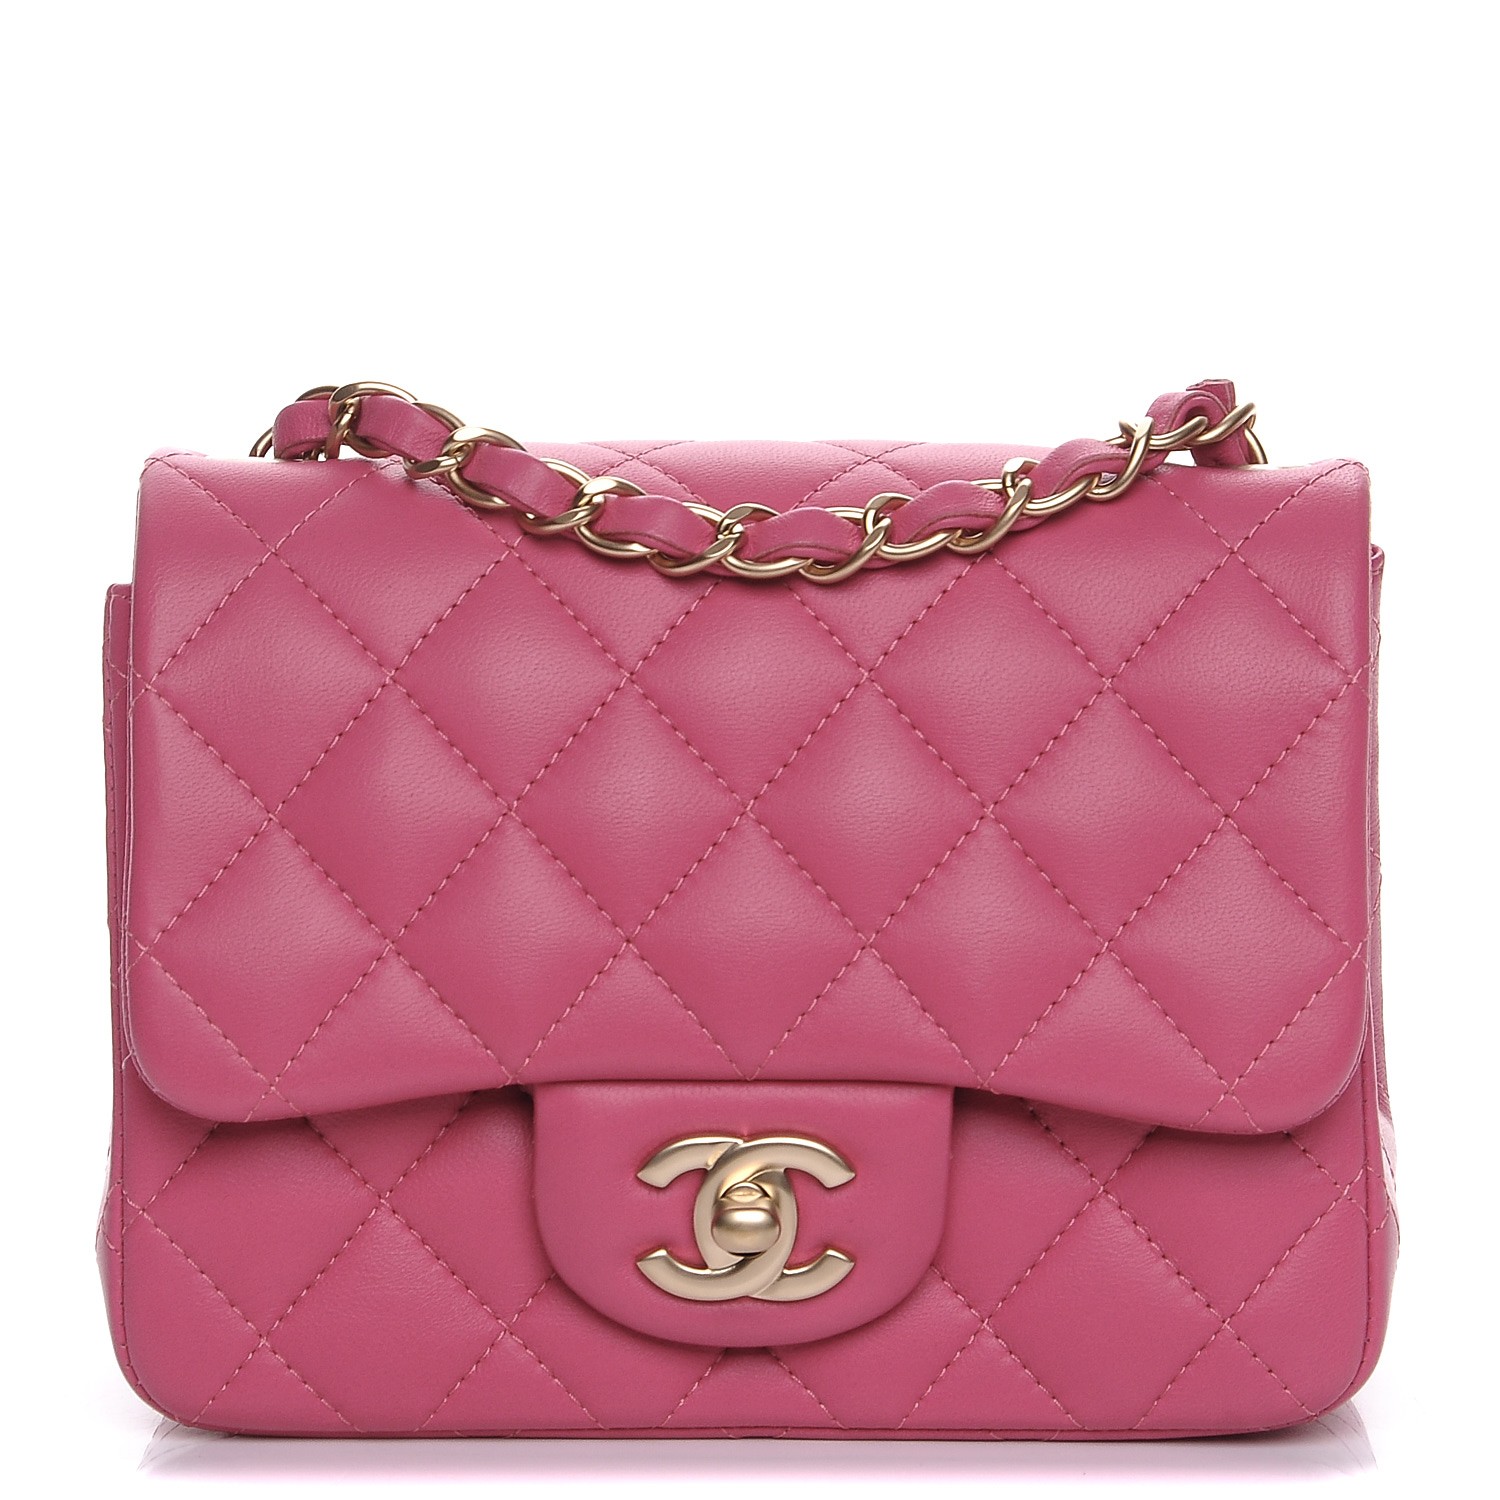 CHANEL Lambskin Quilted Mini Square Flap Dark Pink 209086 | FASHIONPHILE